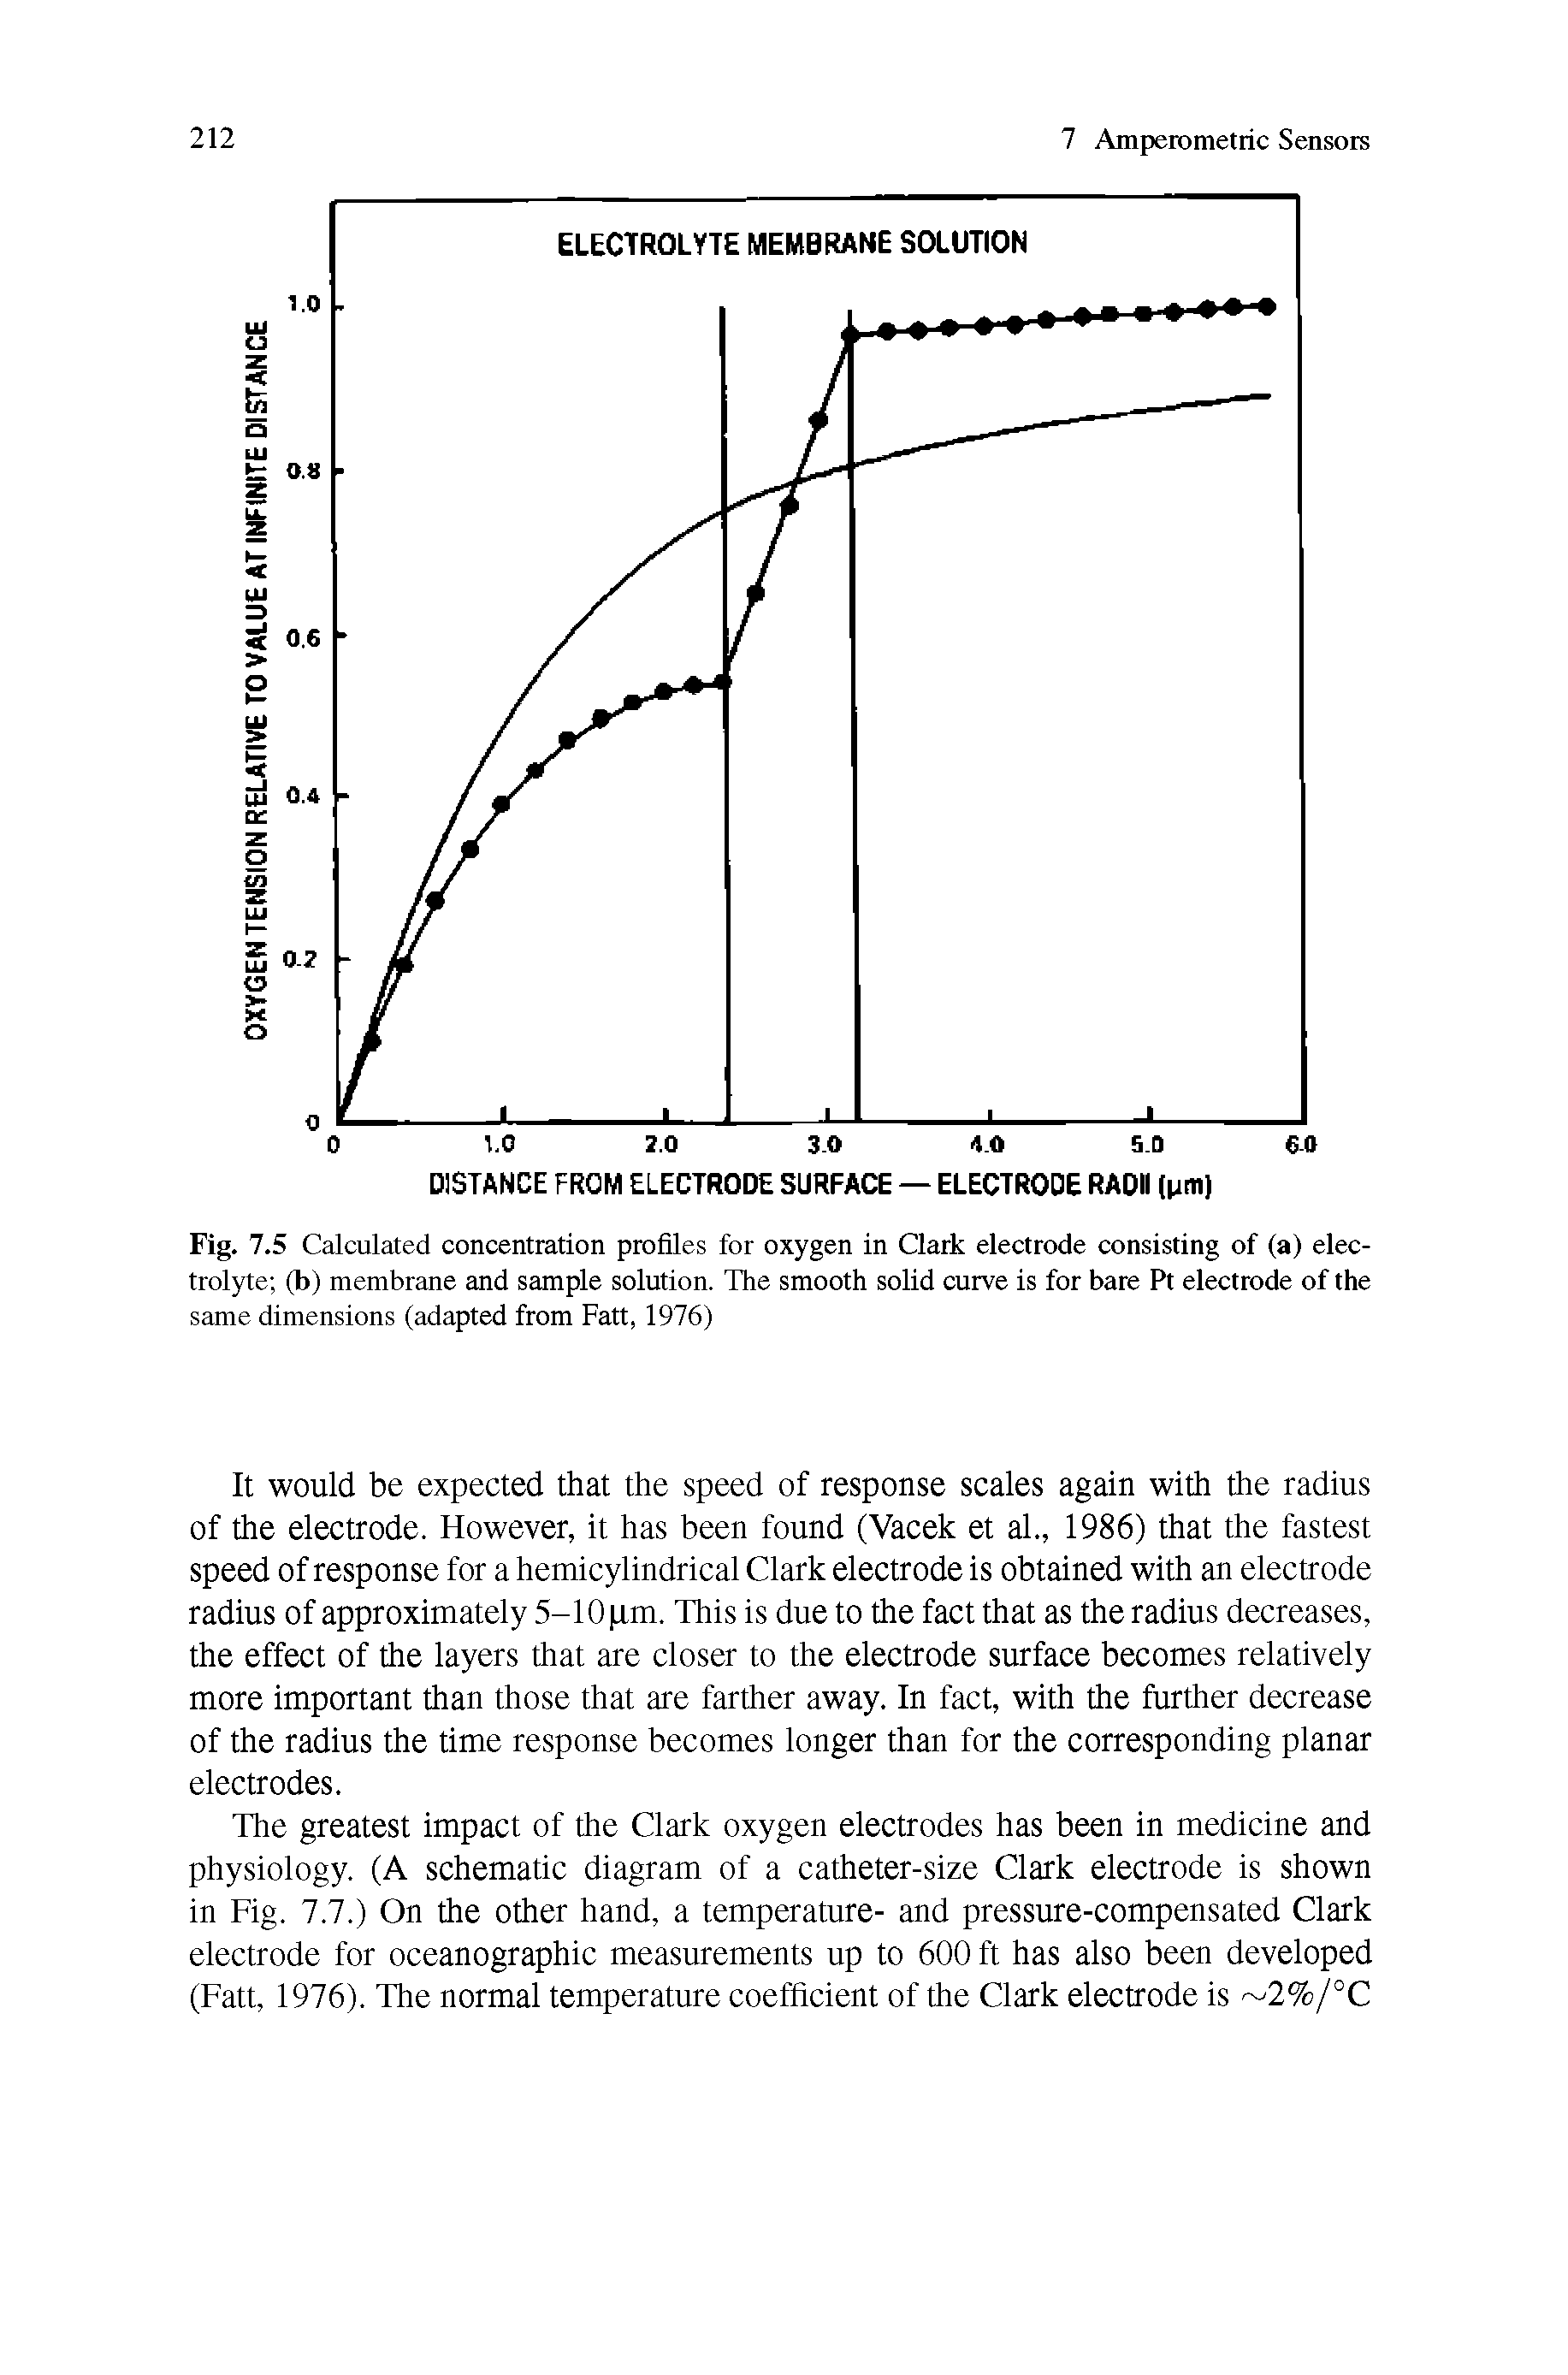 Fig. 7.5 Calculated concentration profiles for oxygen in Clark electrode consisting of (a) electrolyte (b) membrane and sample solution. The smooth solid curve is for bare Pt electrode of the same dimensions (adapted from Fatt, 1976)...